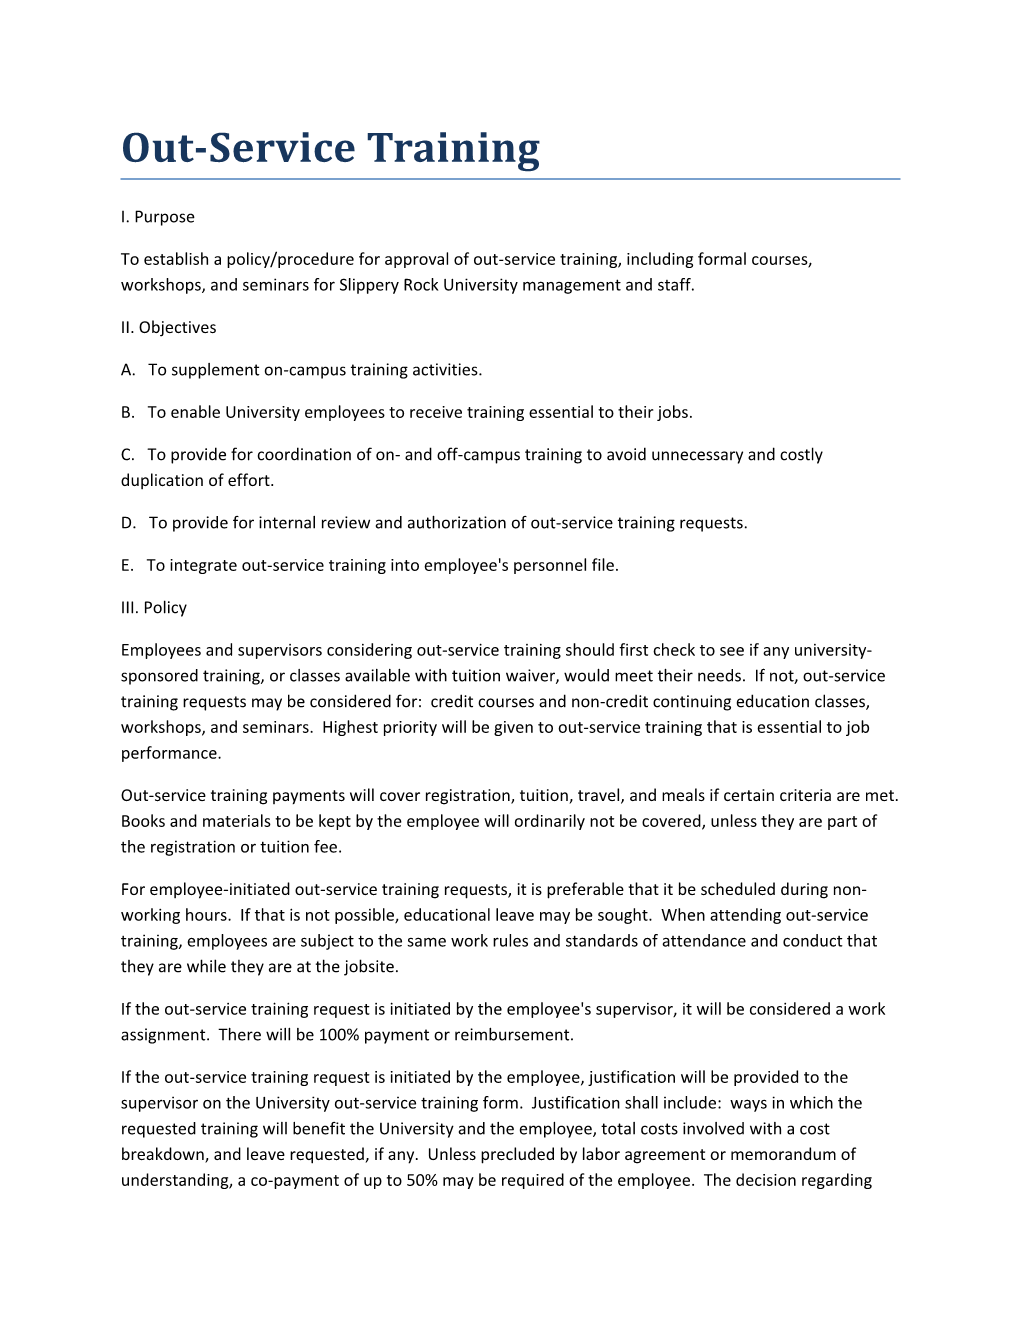 A. to Supplement On-Campus Training Activities